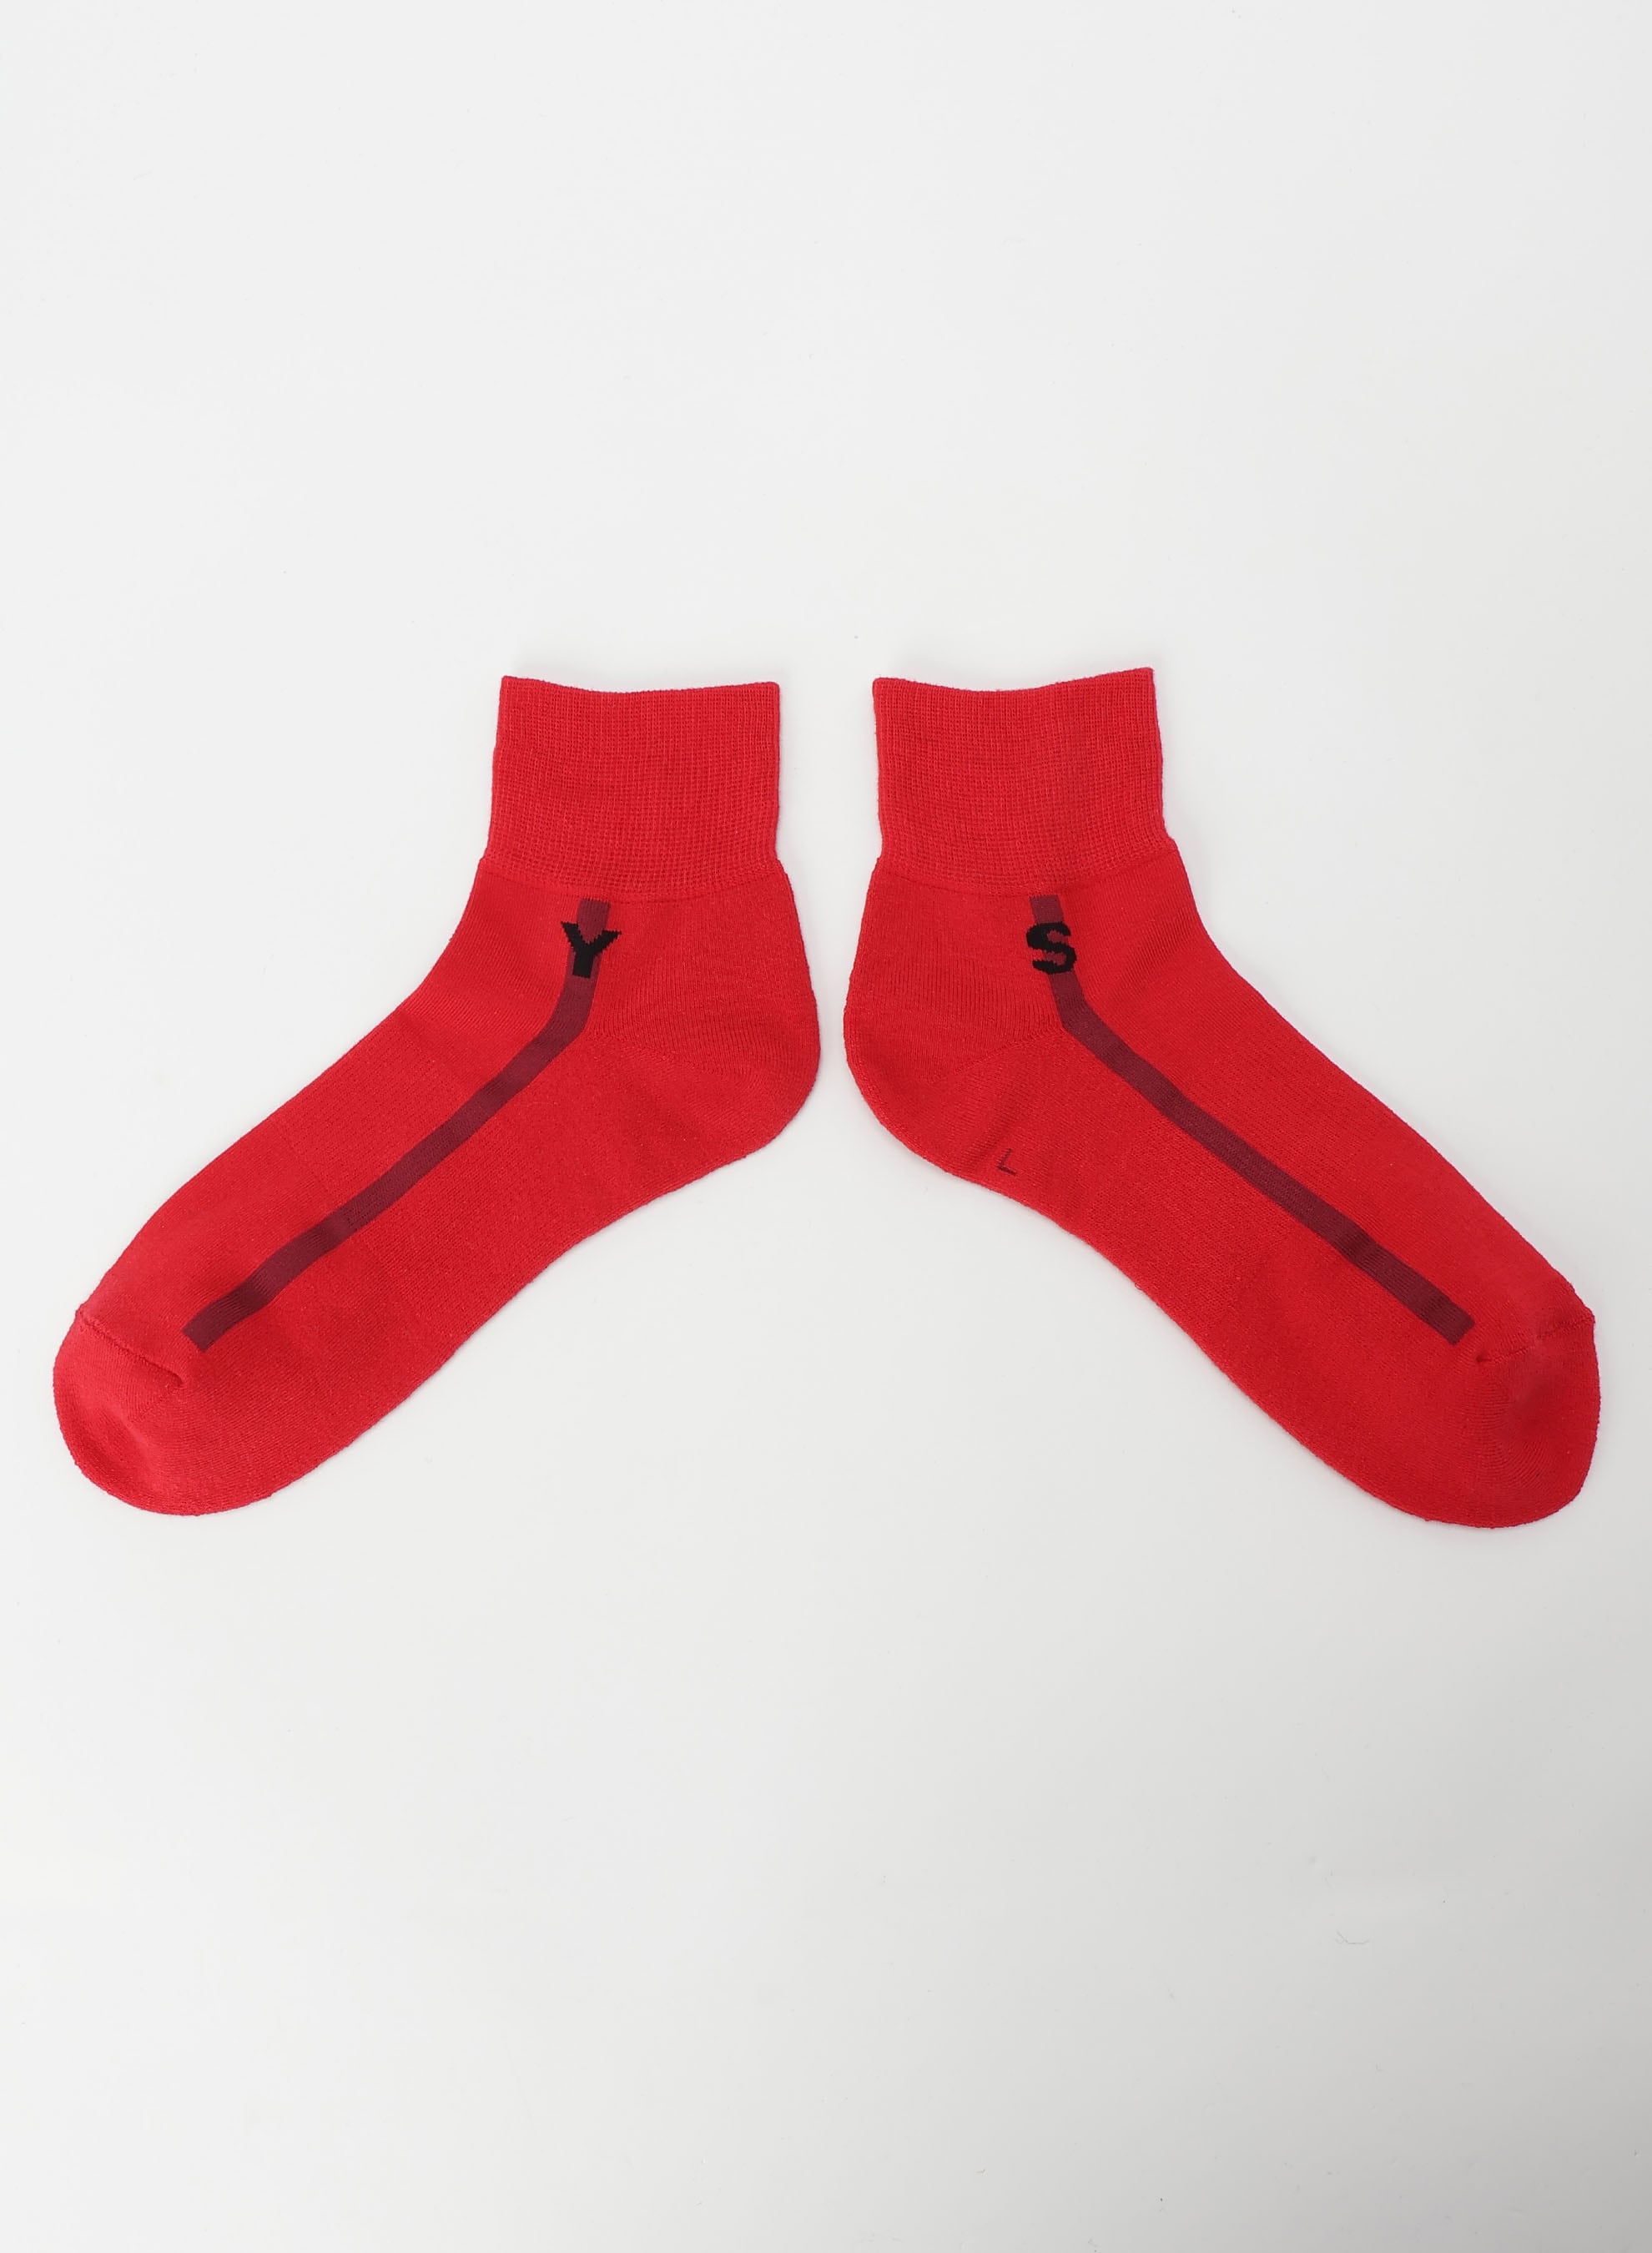 Y's × CHICSTOCKS]ANKLE SOCKS(S Red): Y's｜THE SHOP YOHJI YAMAMOTO